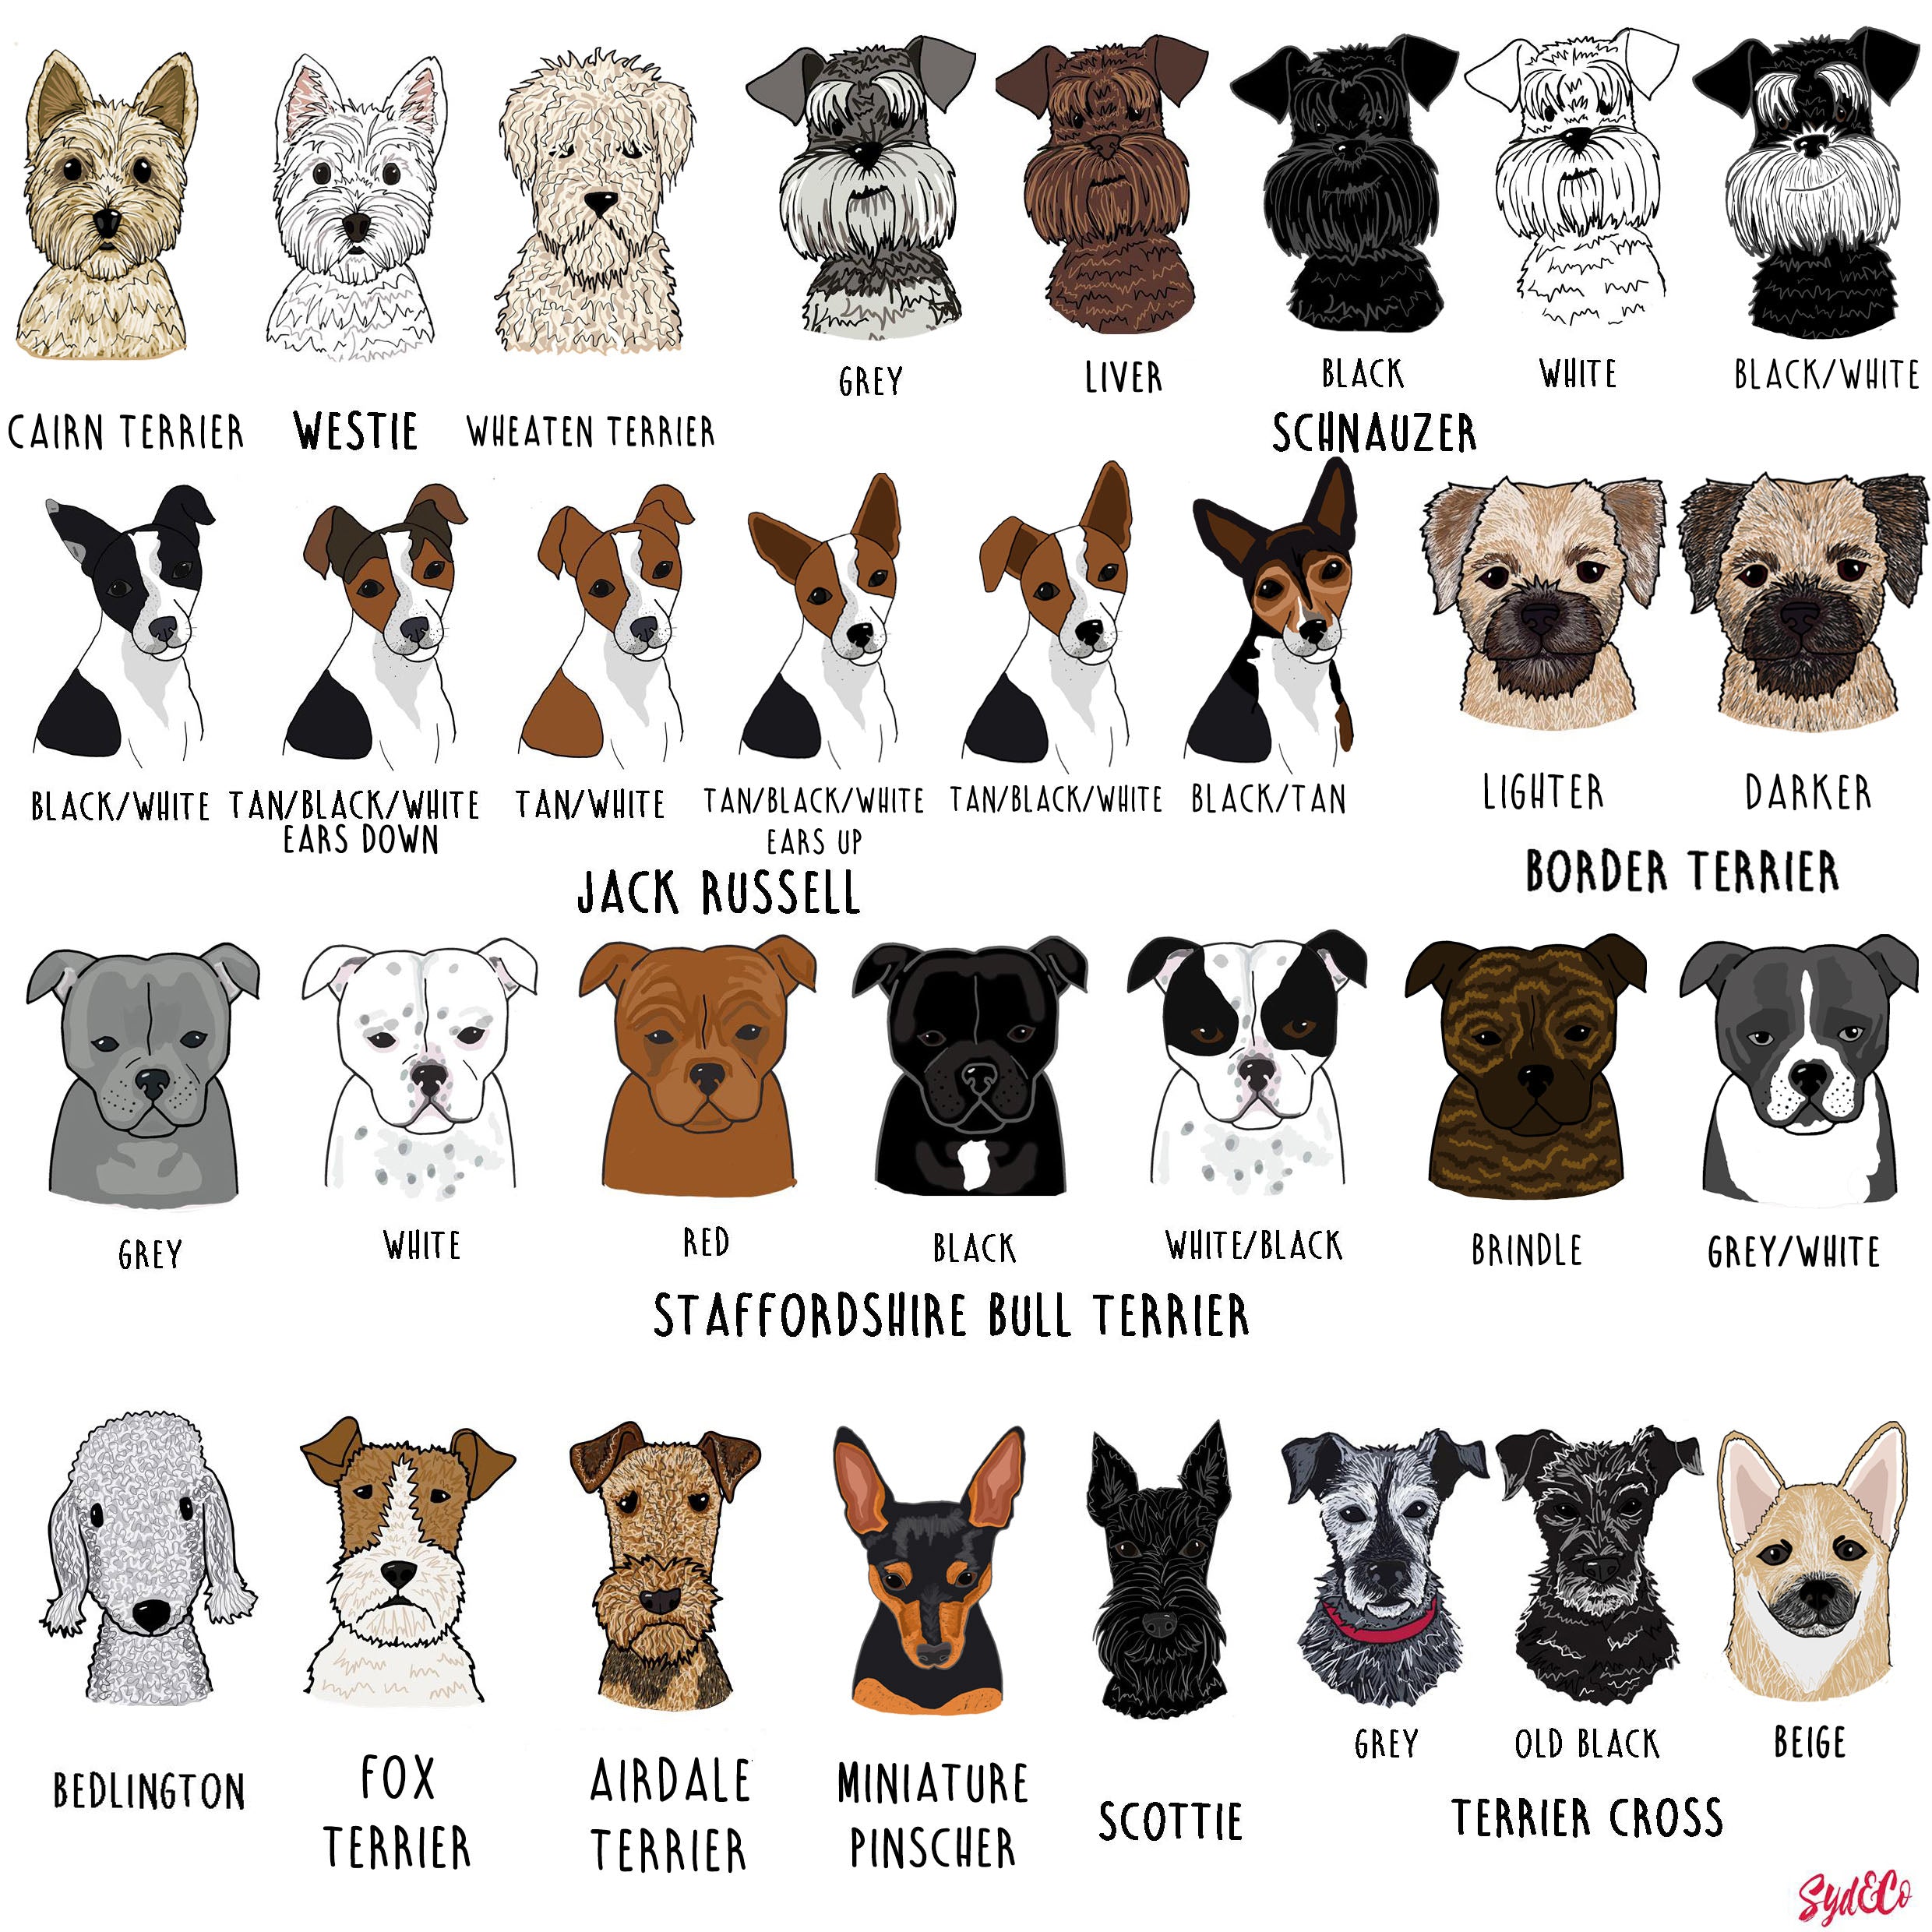 Personalised You and Your Dog T shirt